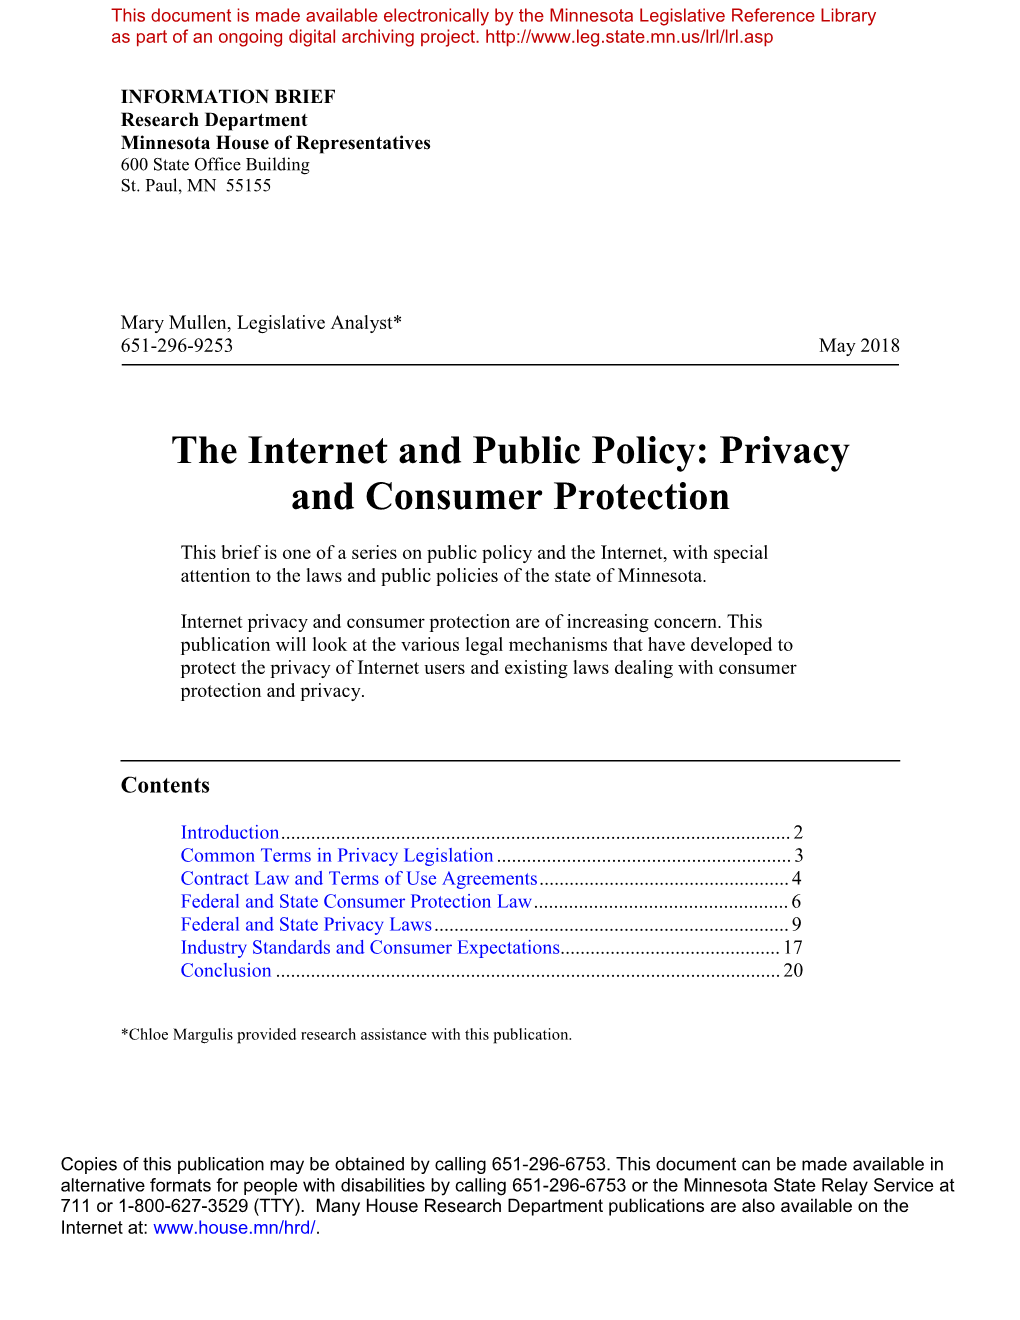 Privacy and Consumer Protection